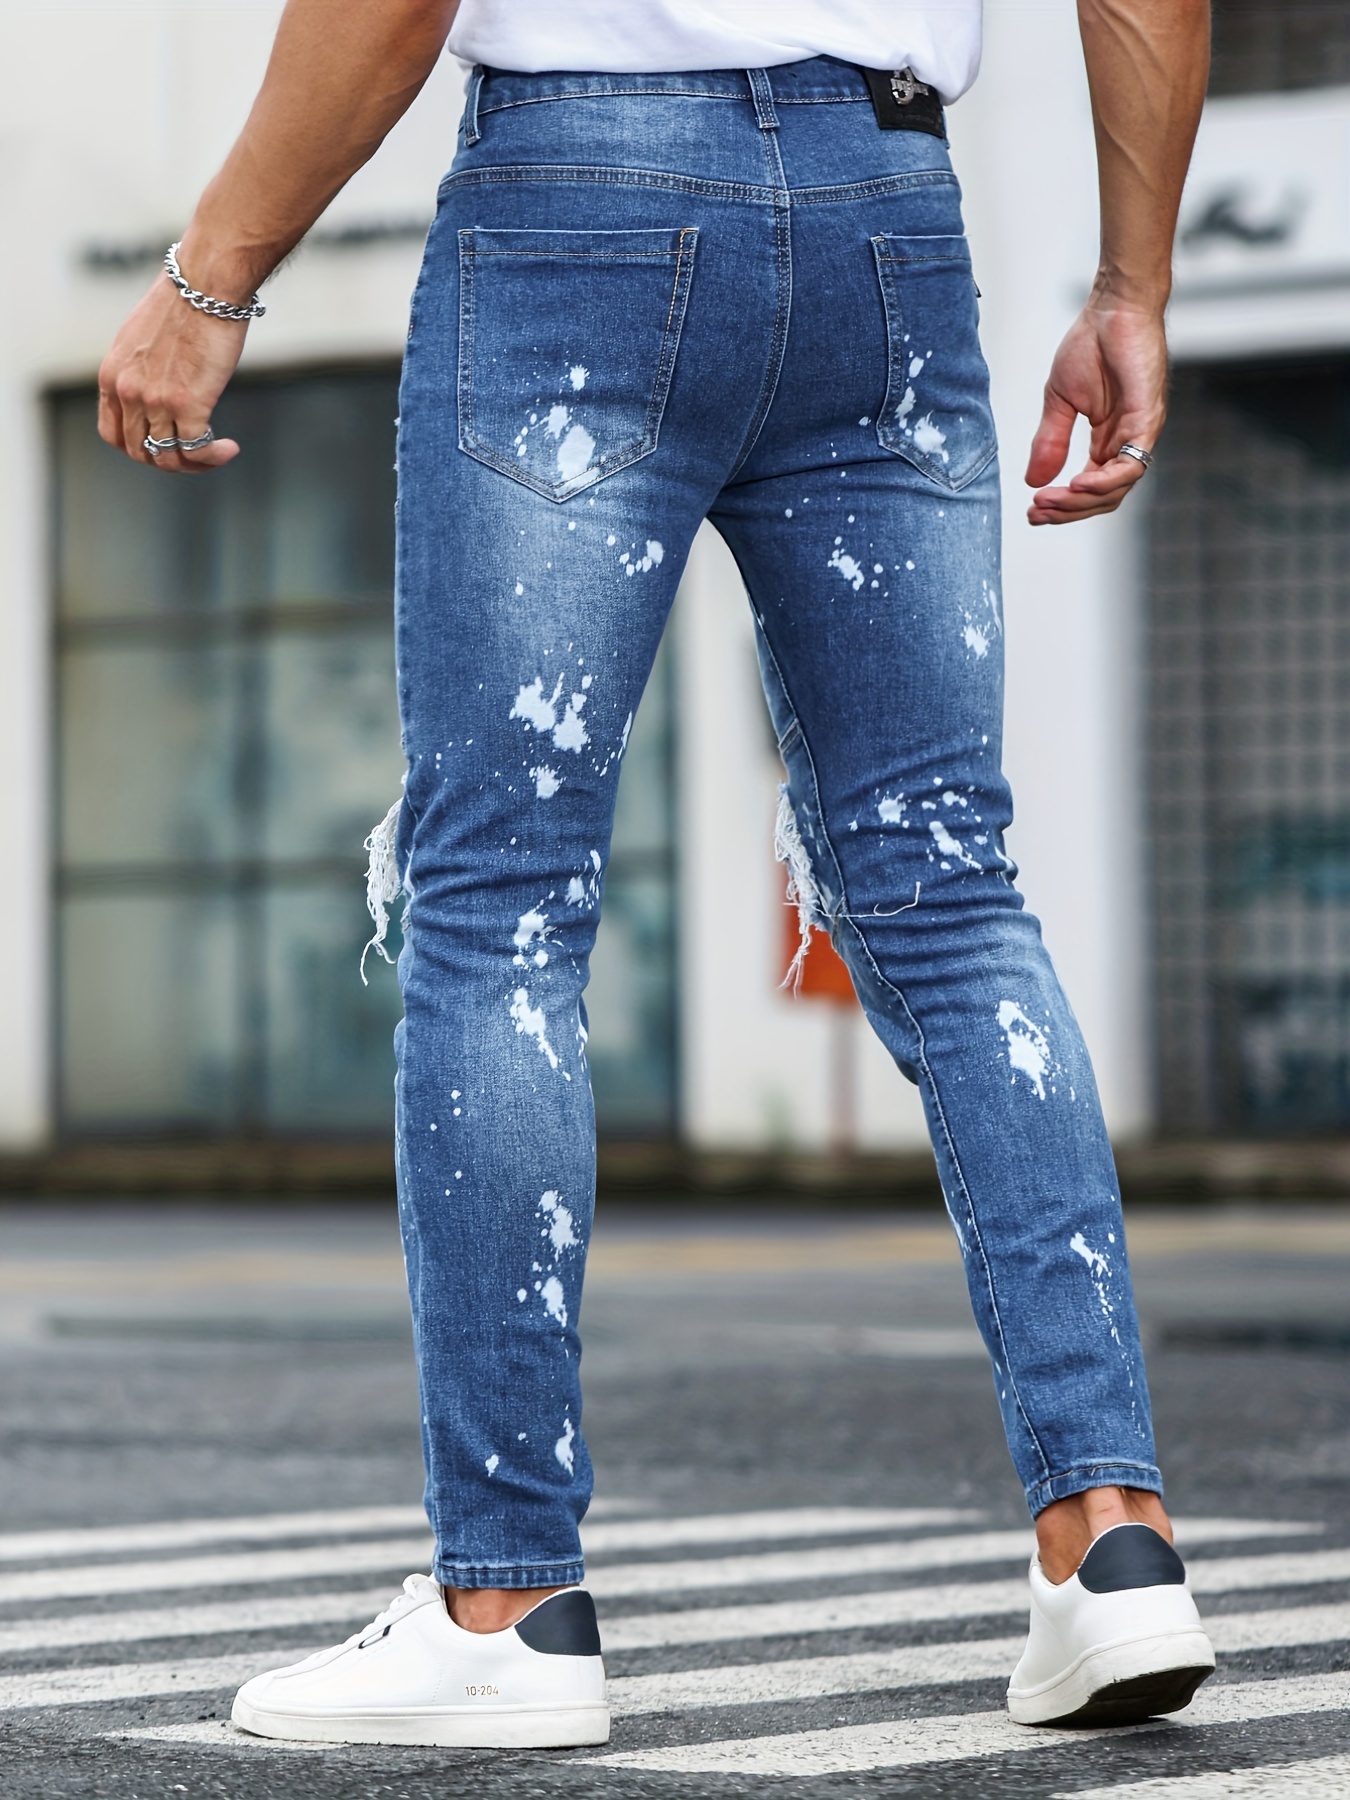 Blue Ripped Jeans For Men Mid-Wasit Slim Fit Denim Pants With Pocket